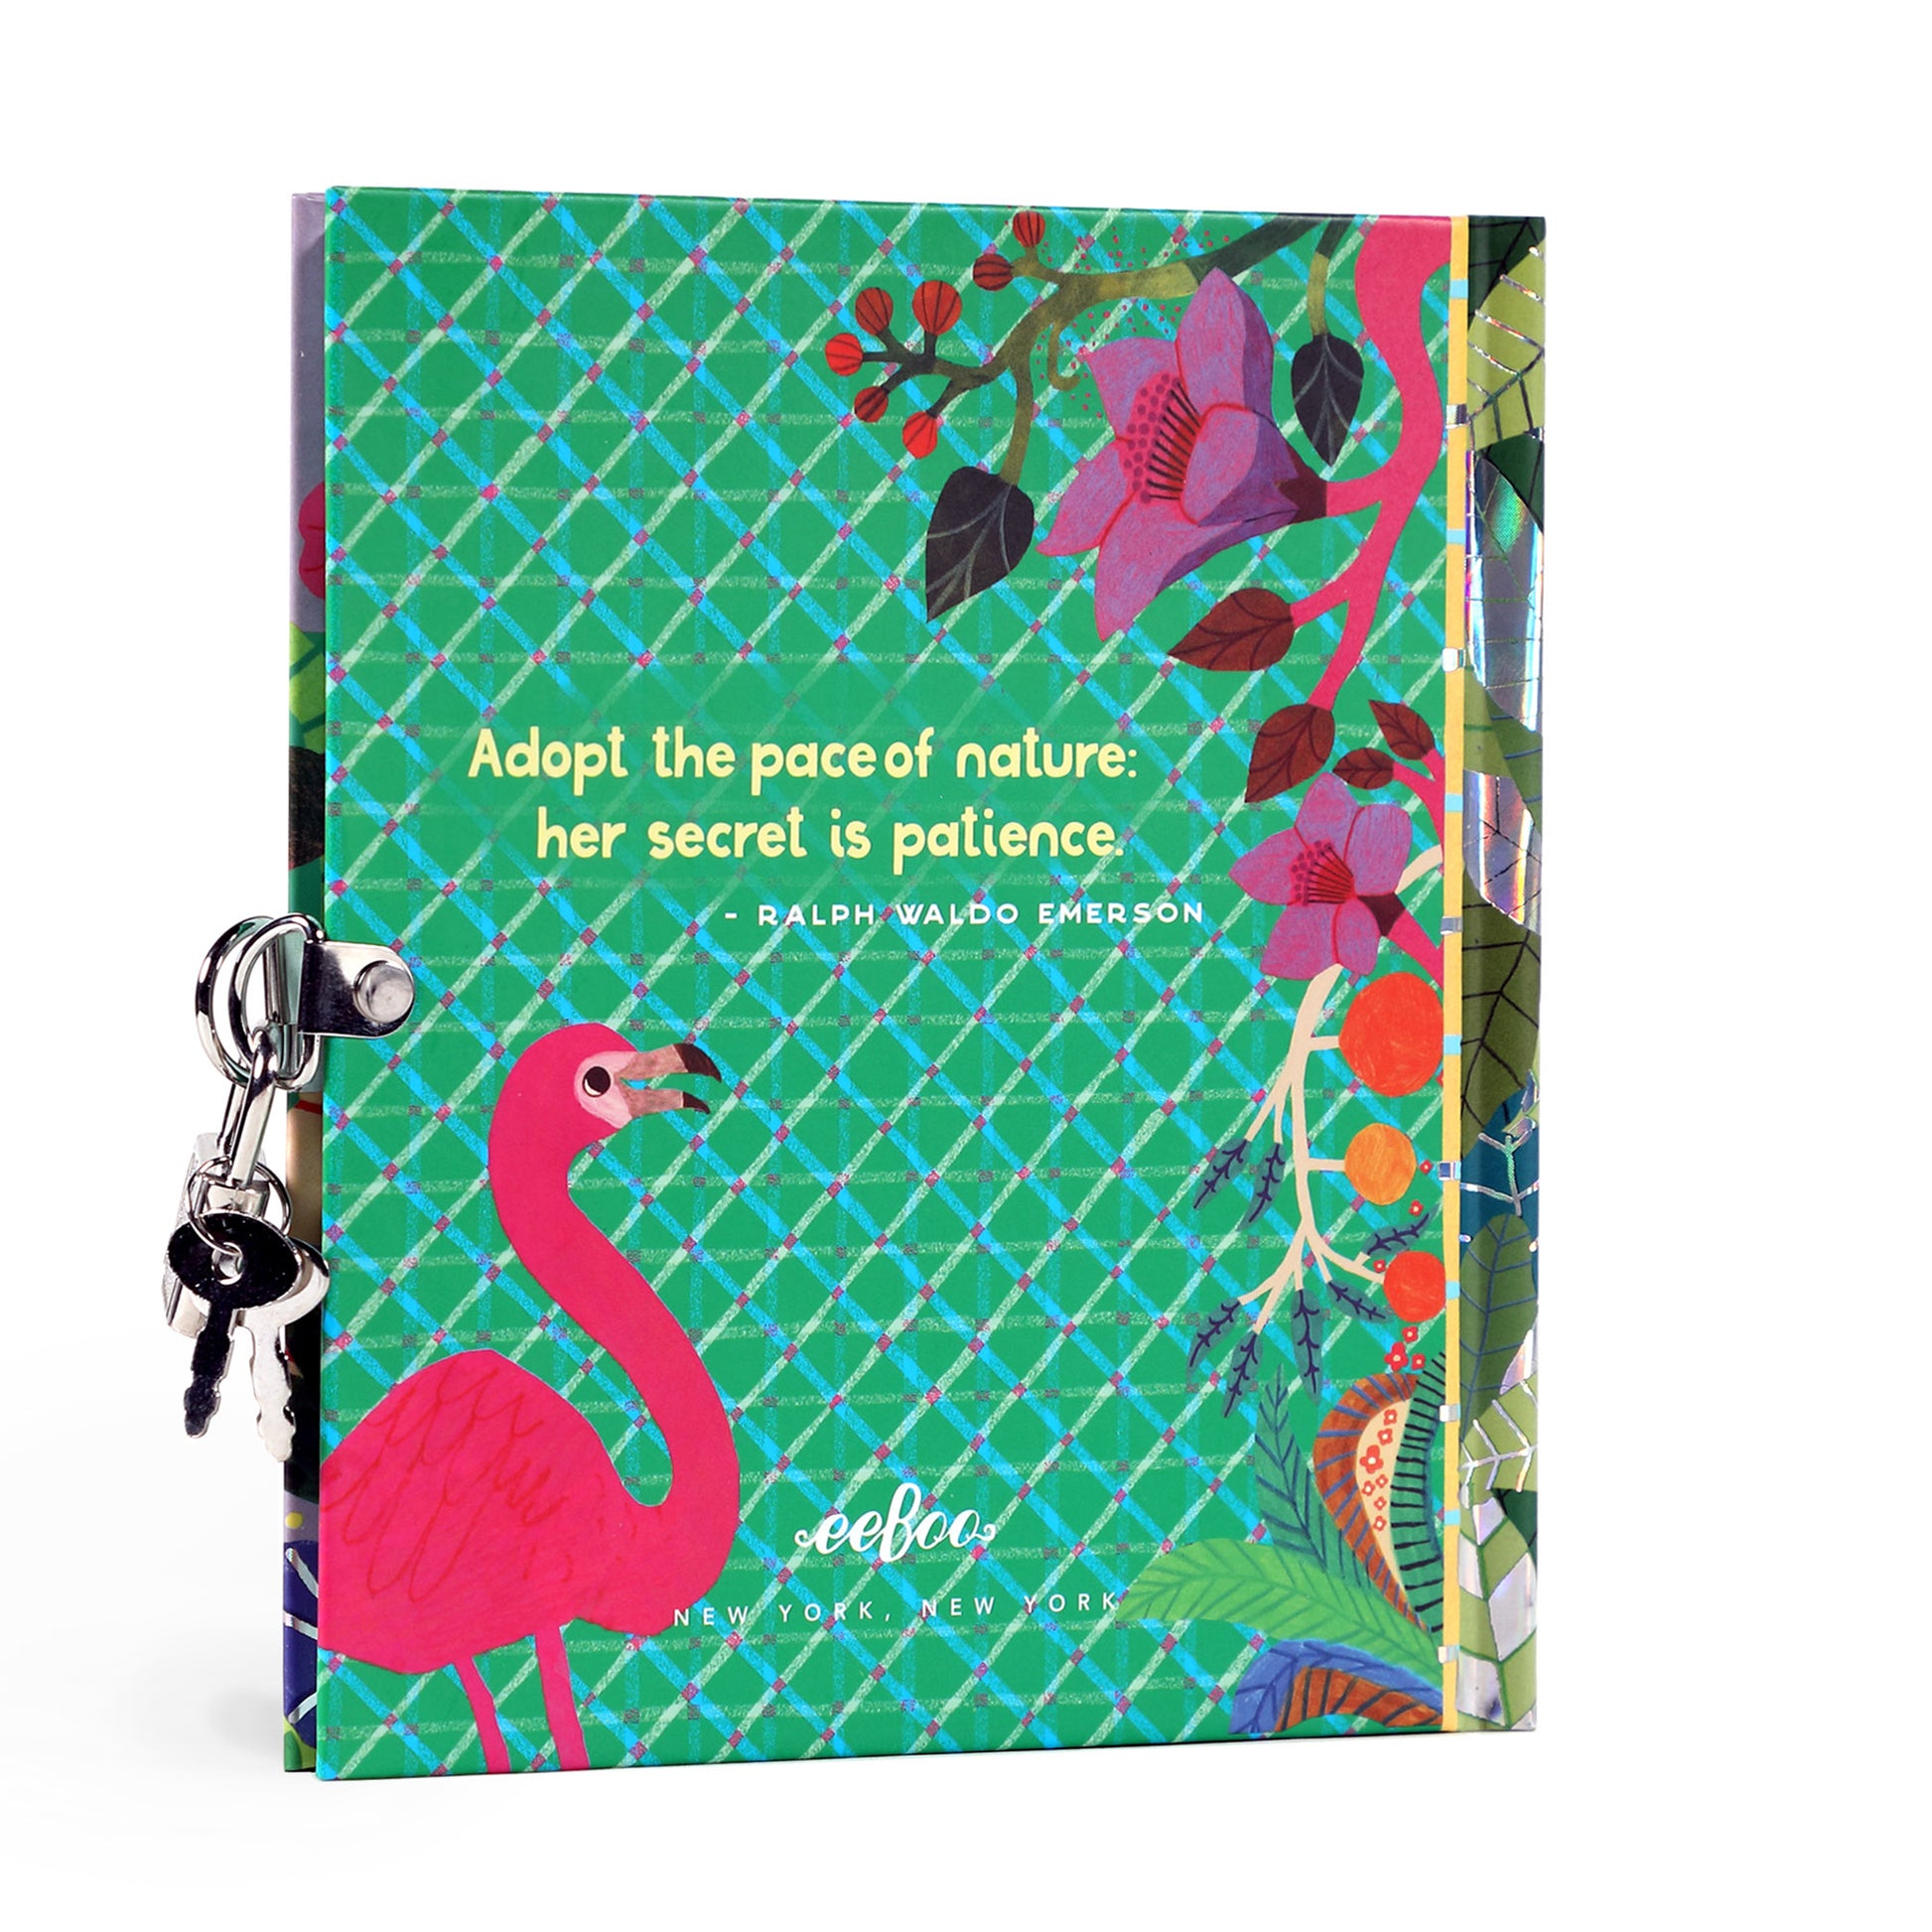 Diary for Girls with lock and key, Secret Pink Journal for Preschool  Learning Writing Drawing School Supplies